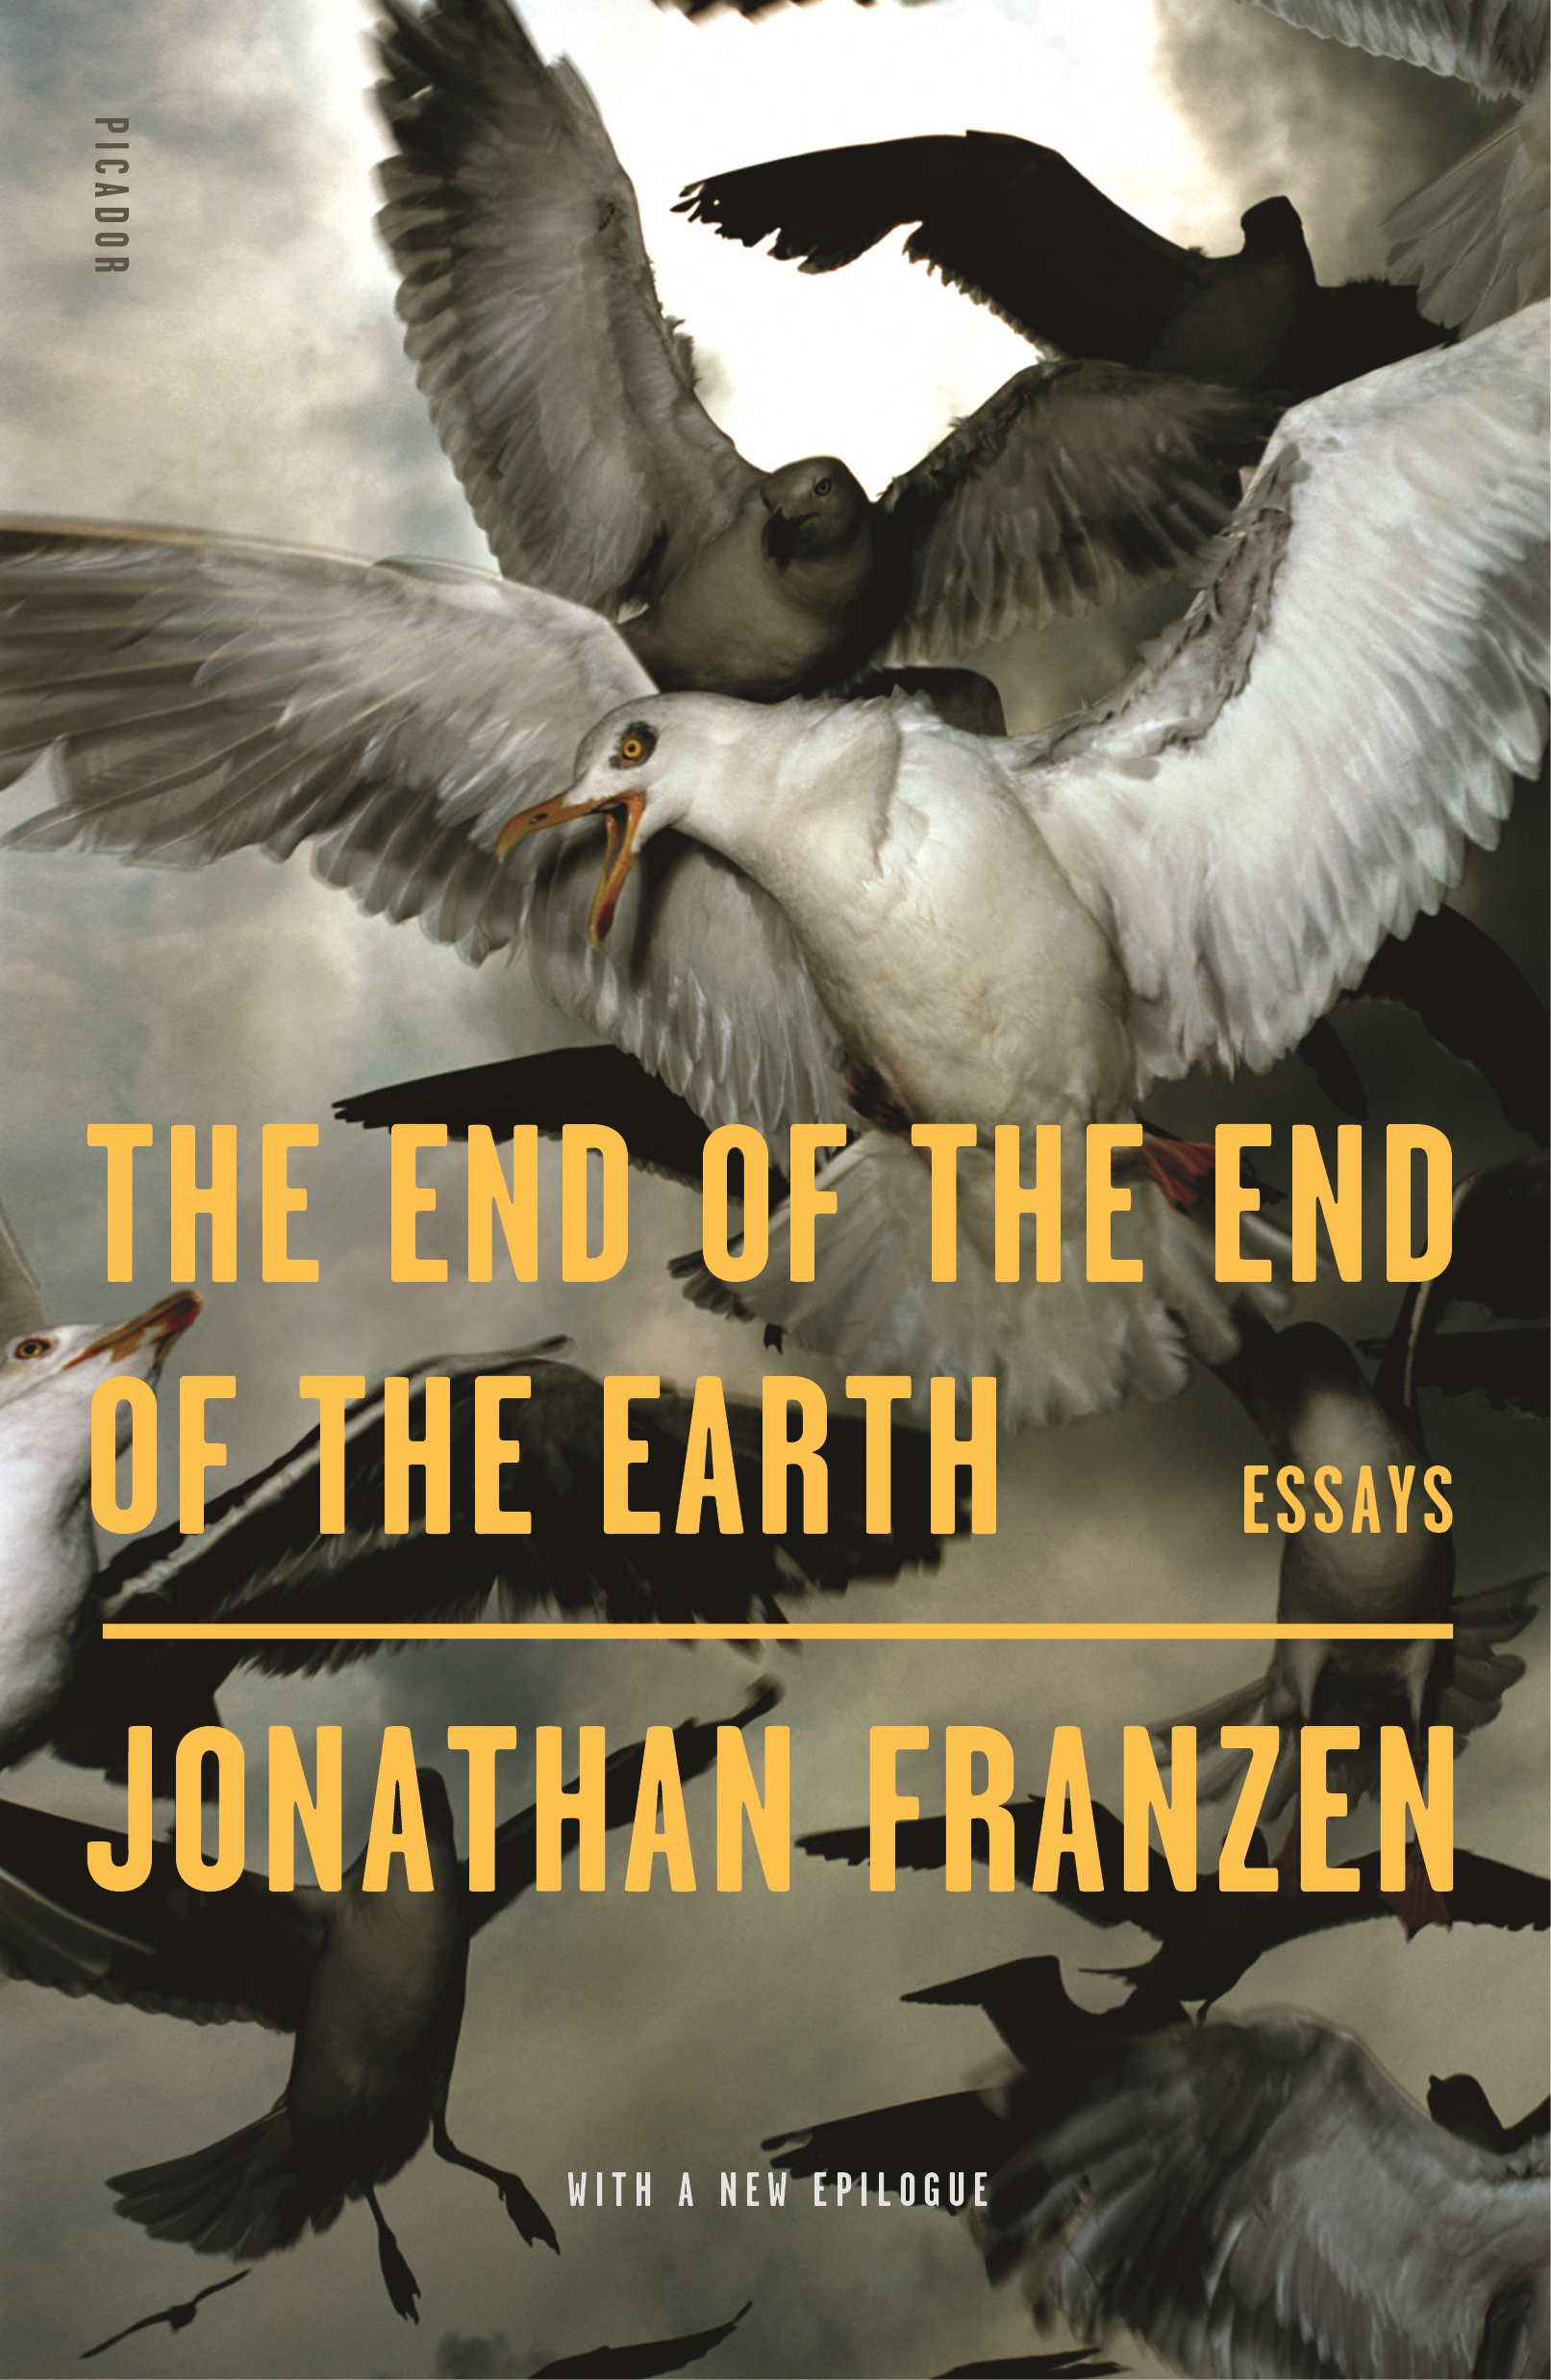 Book “The End of the End of the Earth” by Jonathan Franzen — March 31, 2020